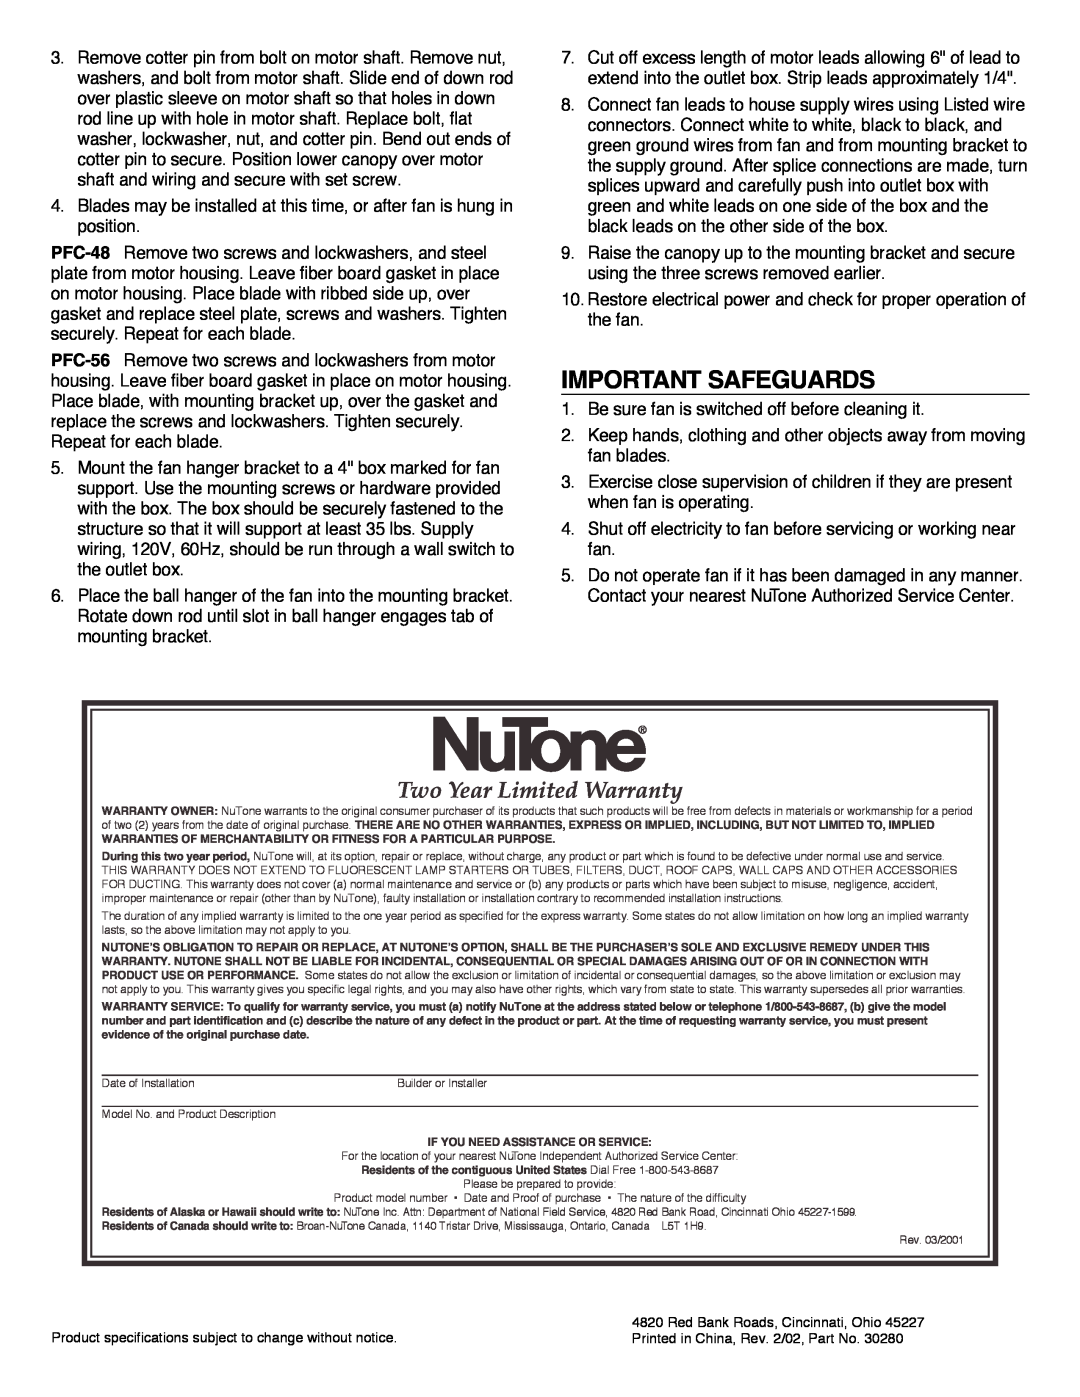 NuTone PFC-48, PFC-56 installation instructions Important Safeguards, Two Year Limited Warranty 